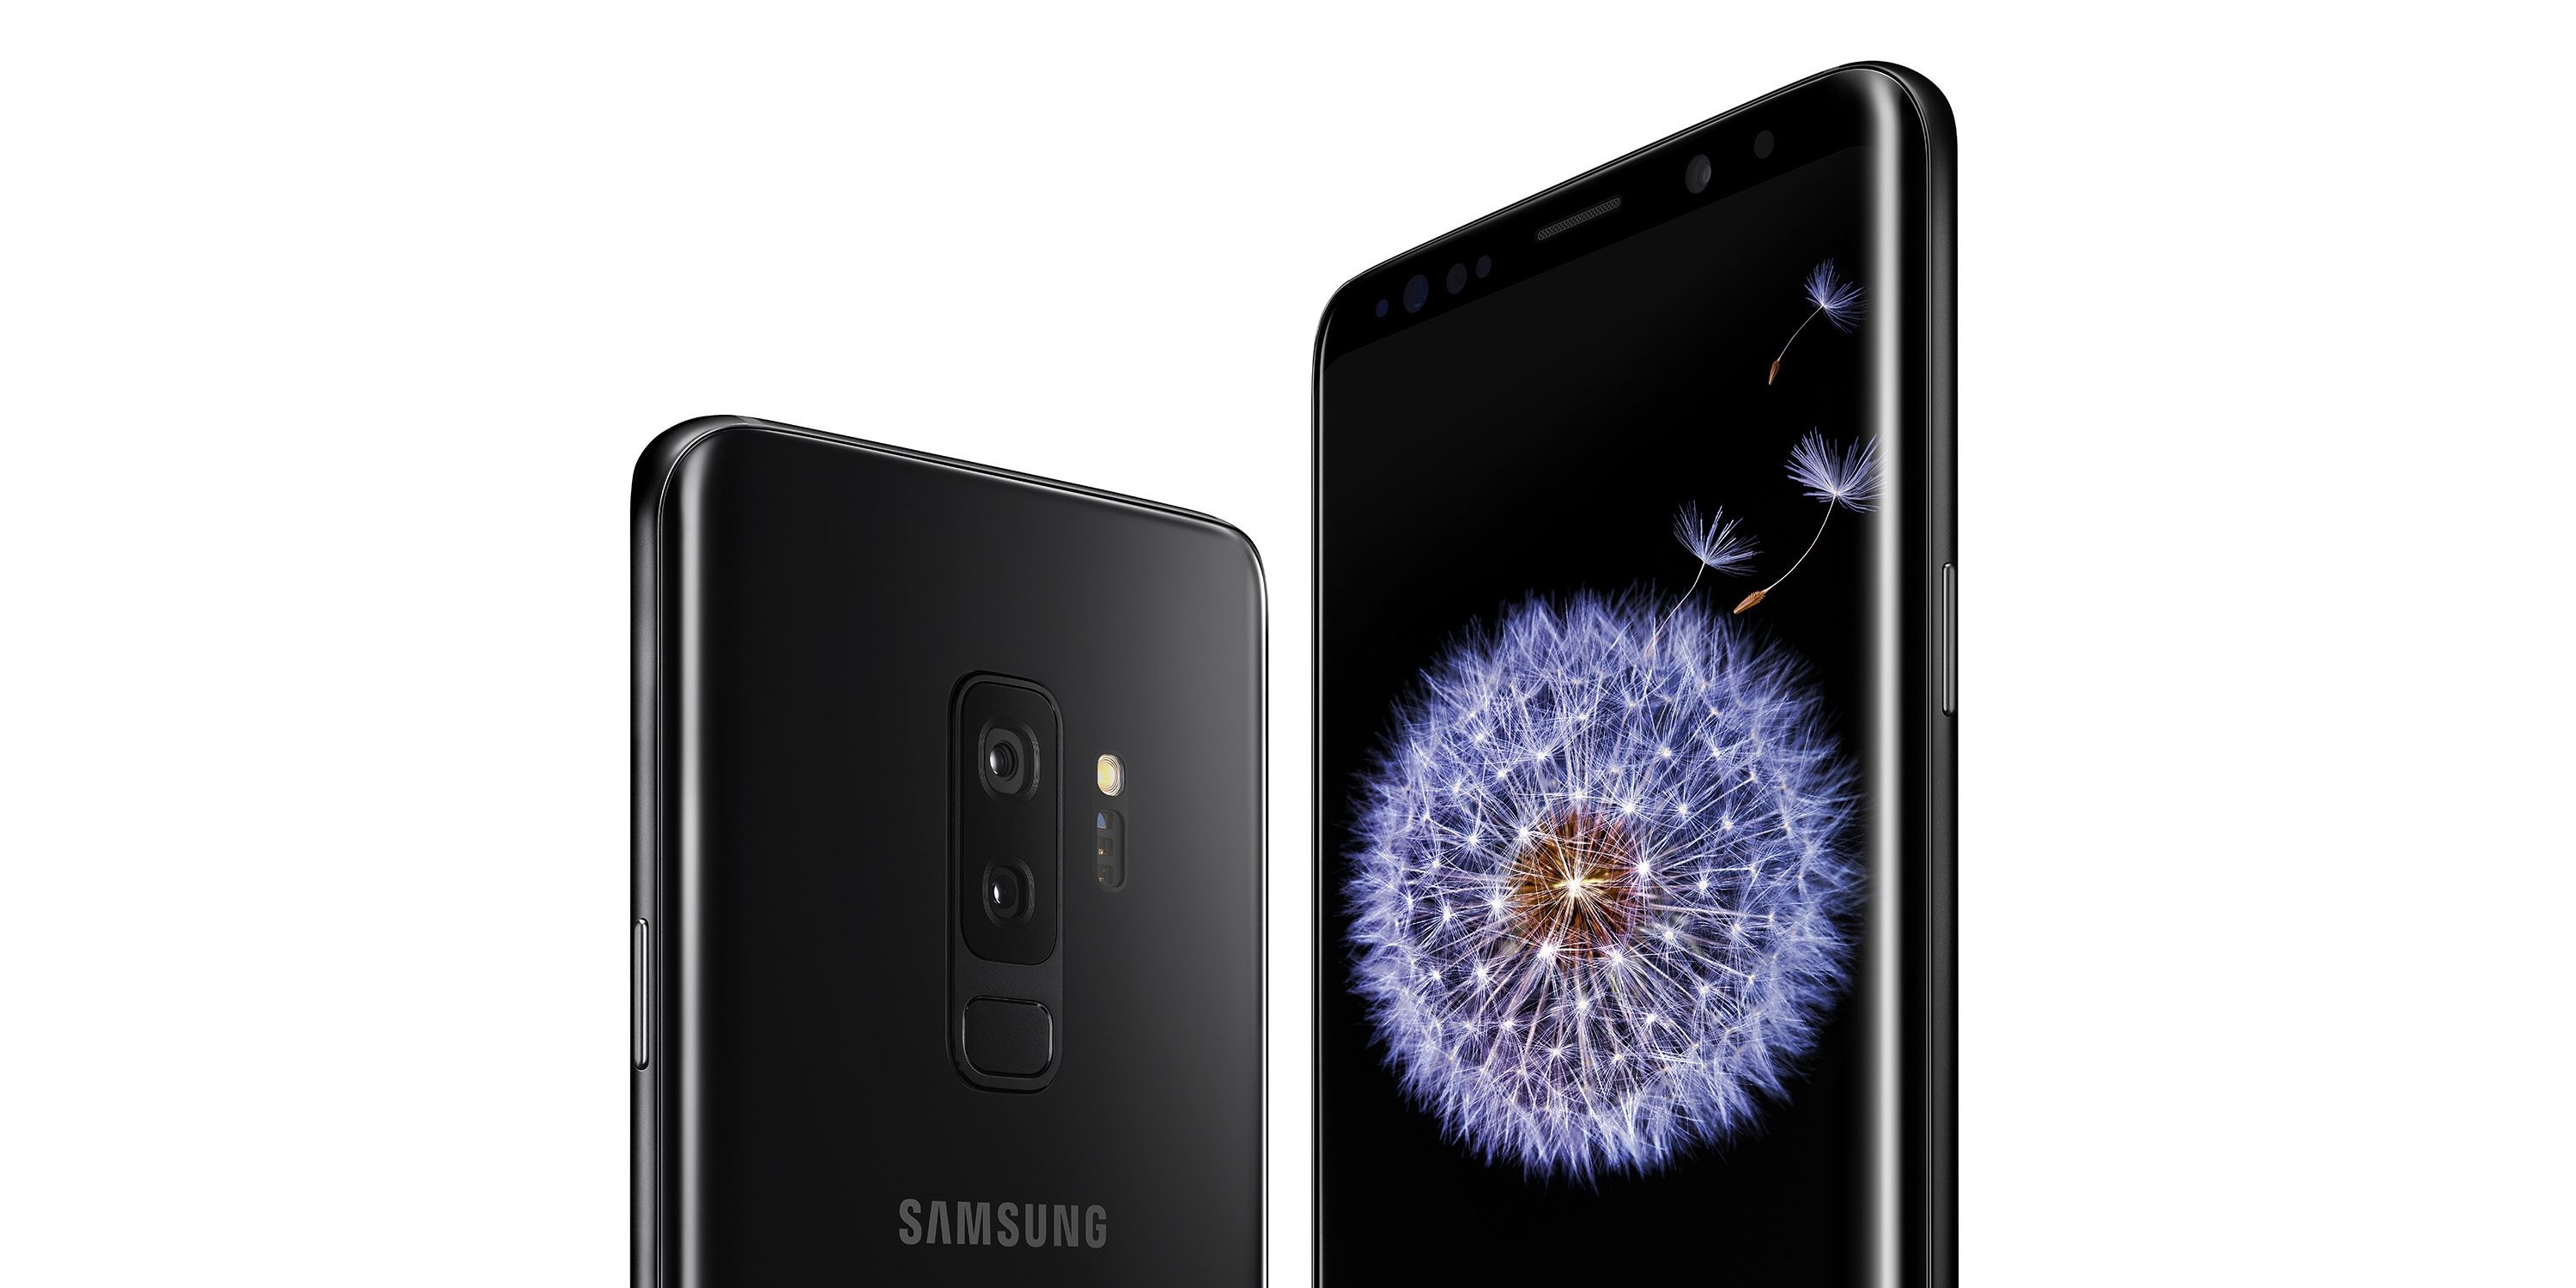 3000x1500 Download the official Samsung Galaxy S9 & S9+ wallpapers here [Gallery]